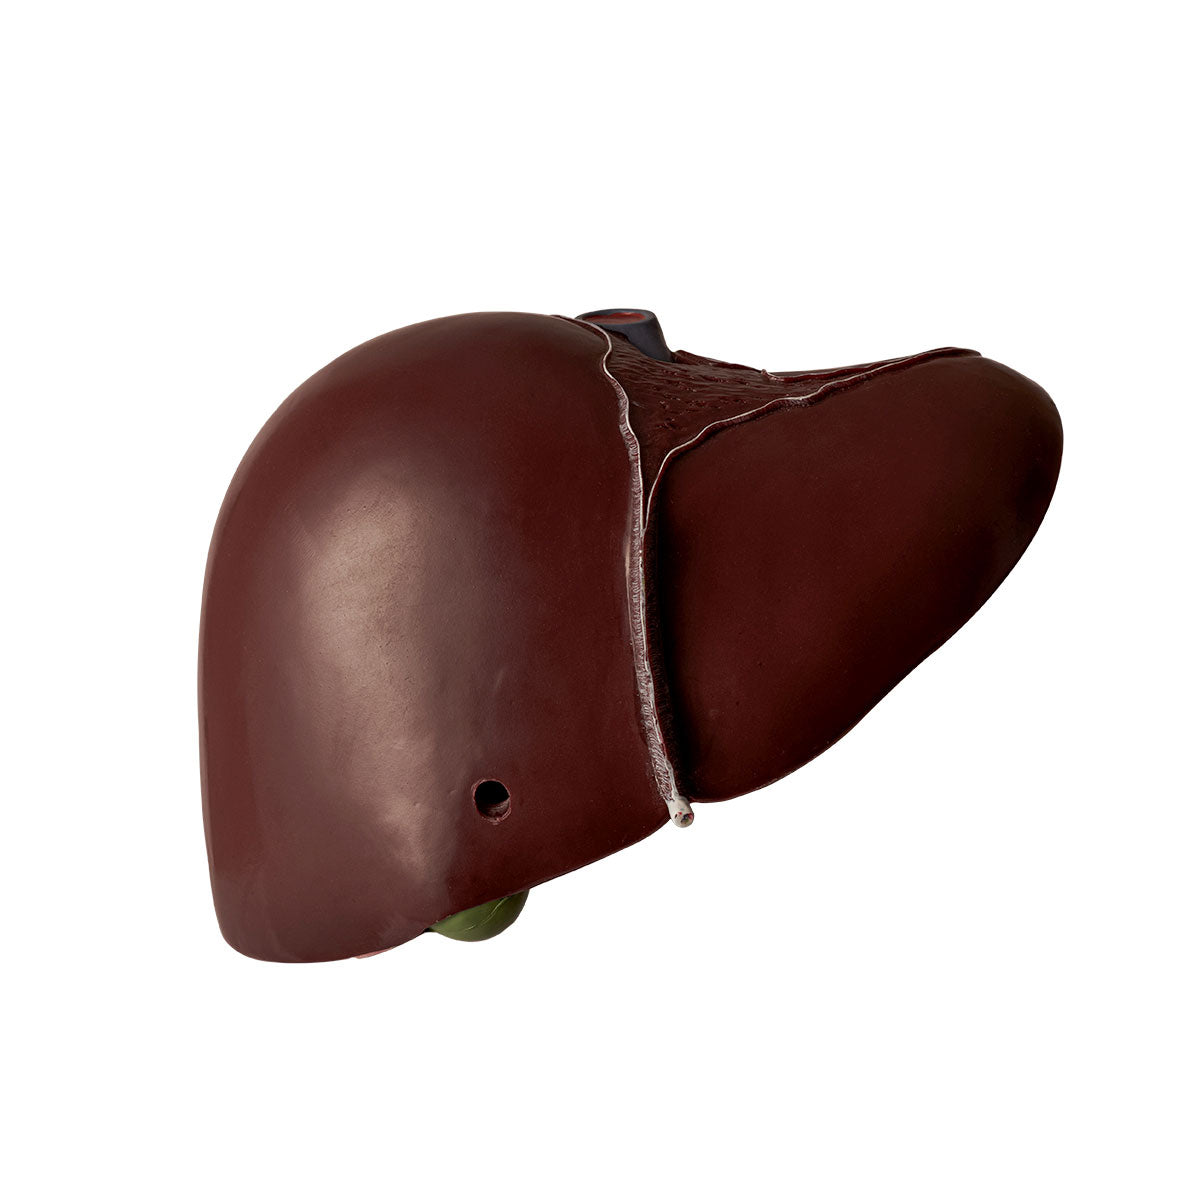 Evotech Deluxe Liver Section W/ Gallbladder, 1.5x Life Size